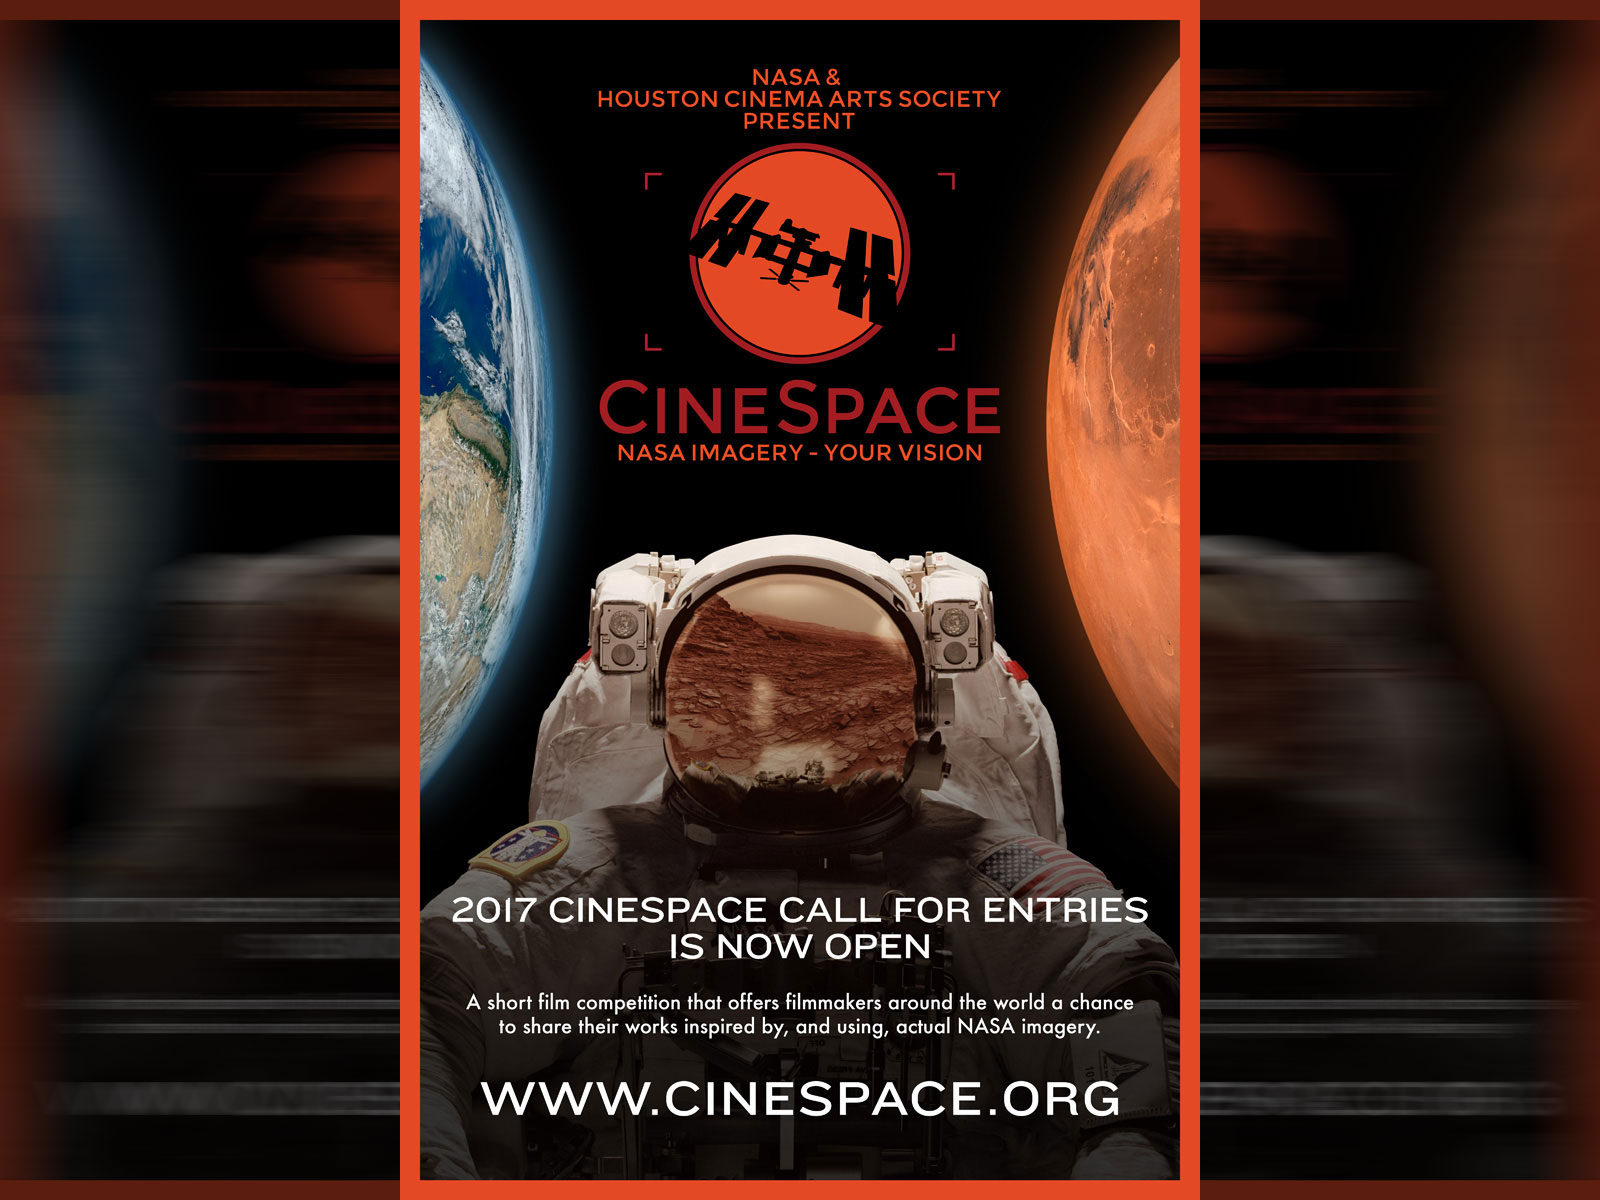 CineSpace: NASA Imagery - Your Vision (Poster)